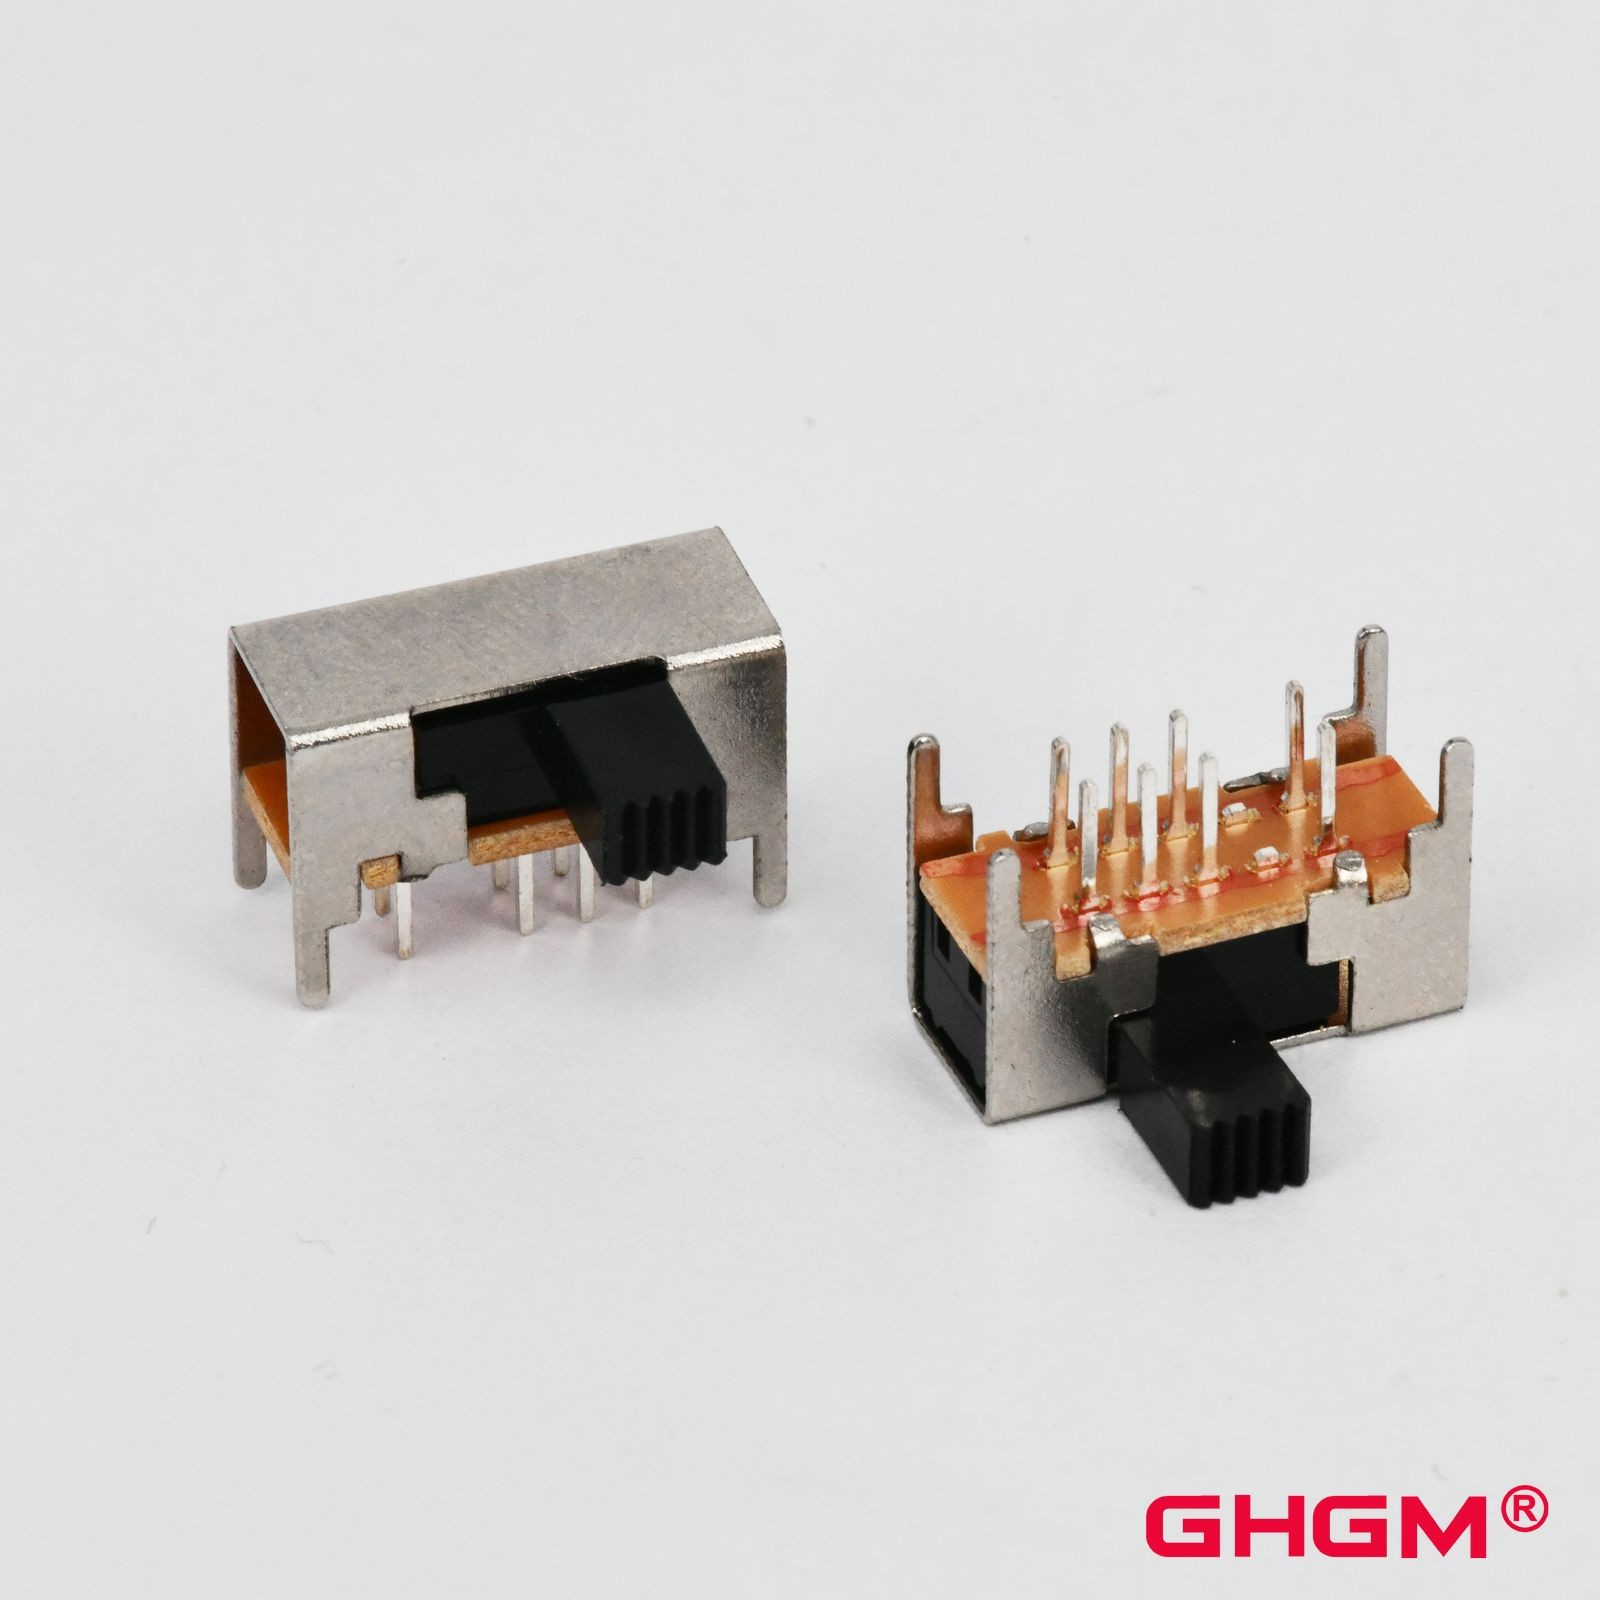 GH23D05 2 row, 3 position, Vertical | Right Angle Slide Switch SMT DIP